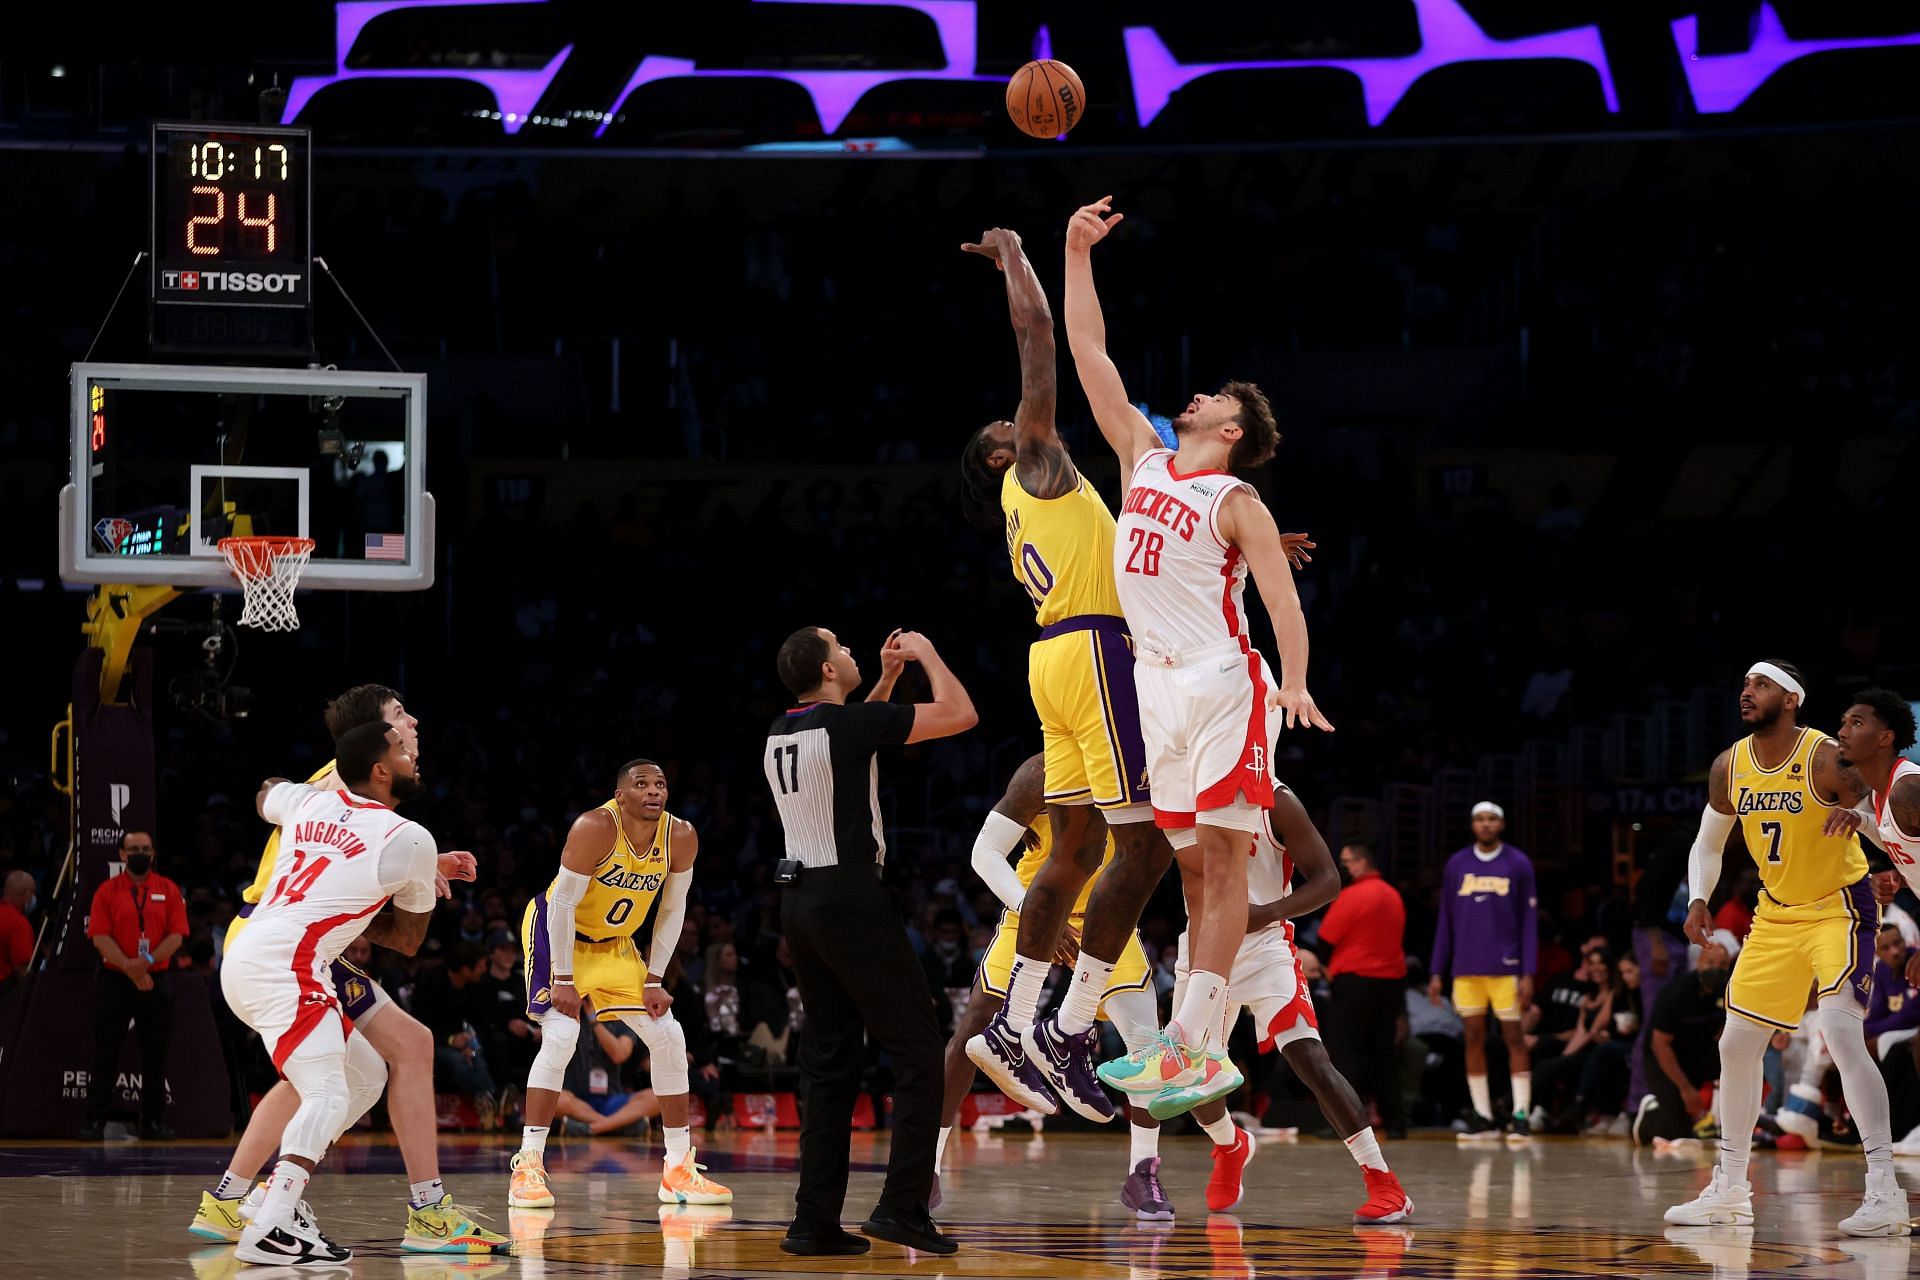 The Houston Rockets suffered a 119-117 loss to the LA Lakers in their previous game